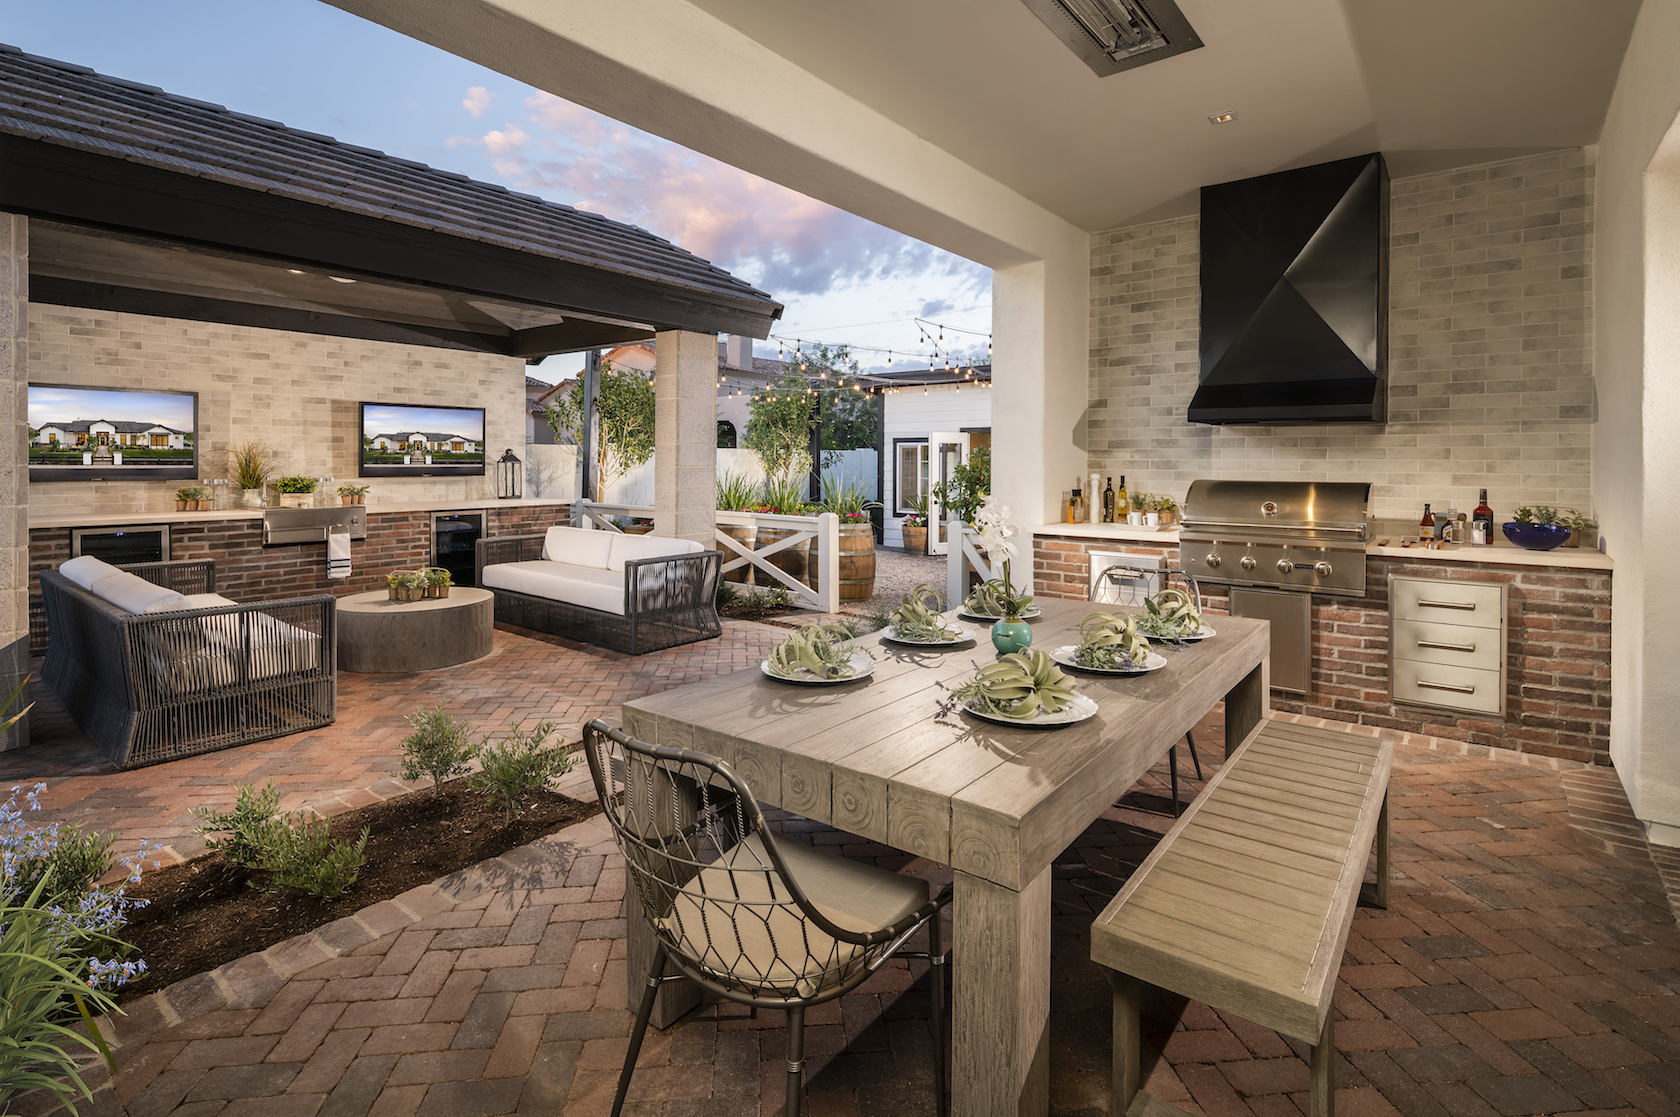 Outdoor patio wit grill and couches.